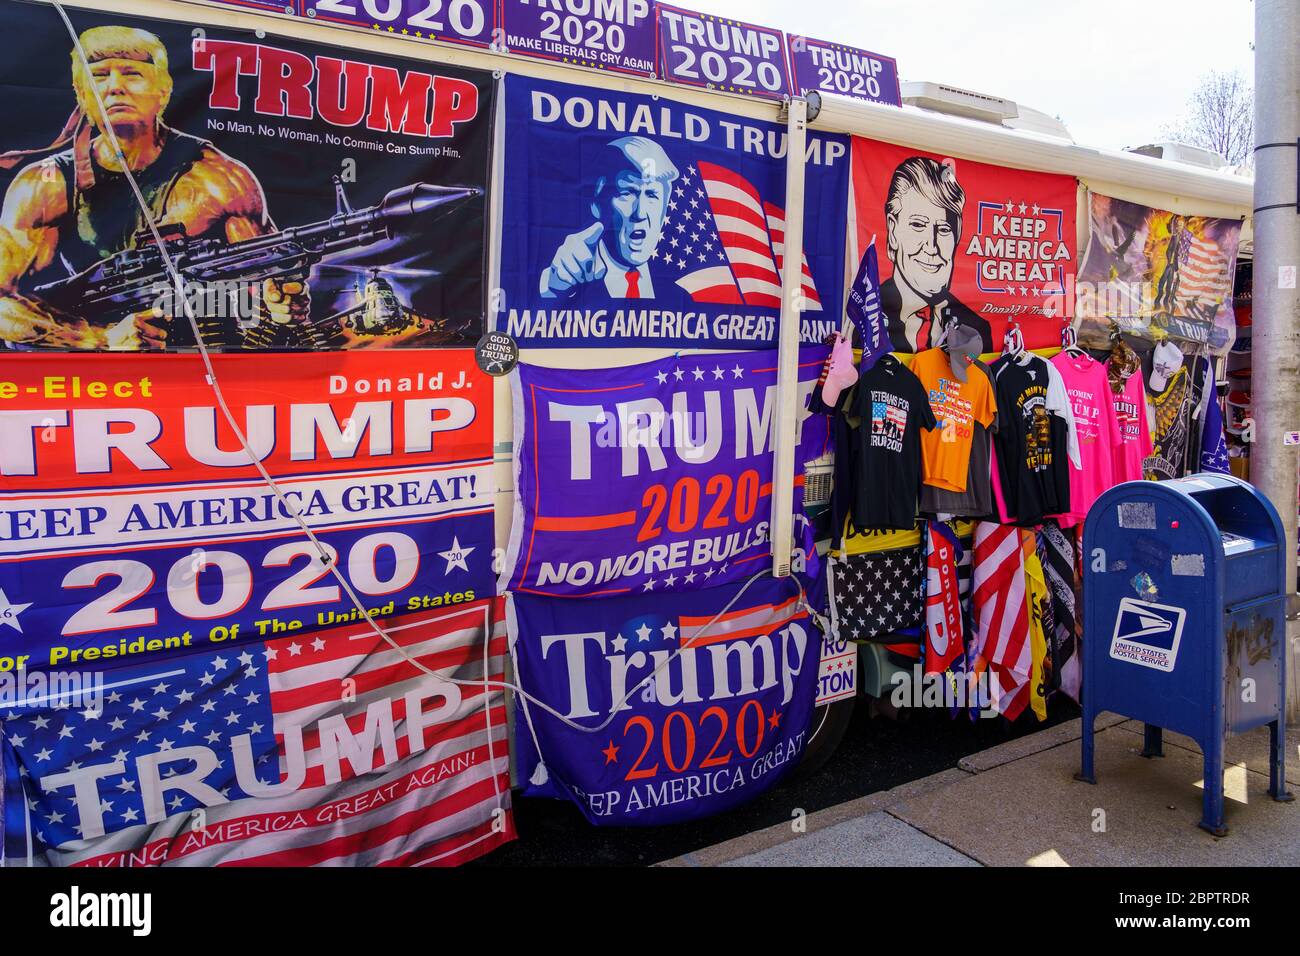 Harrisburg, PA / USA - May 15, 2020: A large RV parked along a street at the capitol building displays Trump 2020 campaign signs. Stock Photo